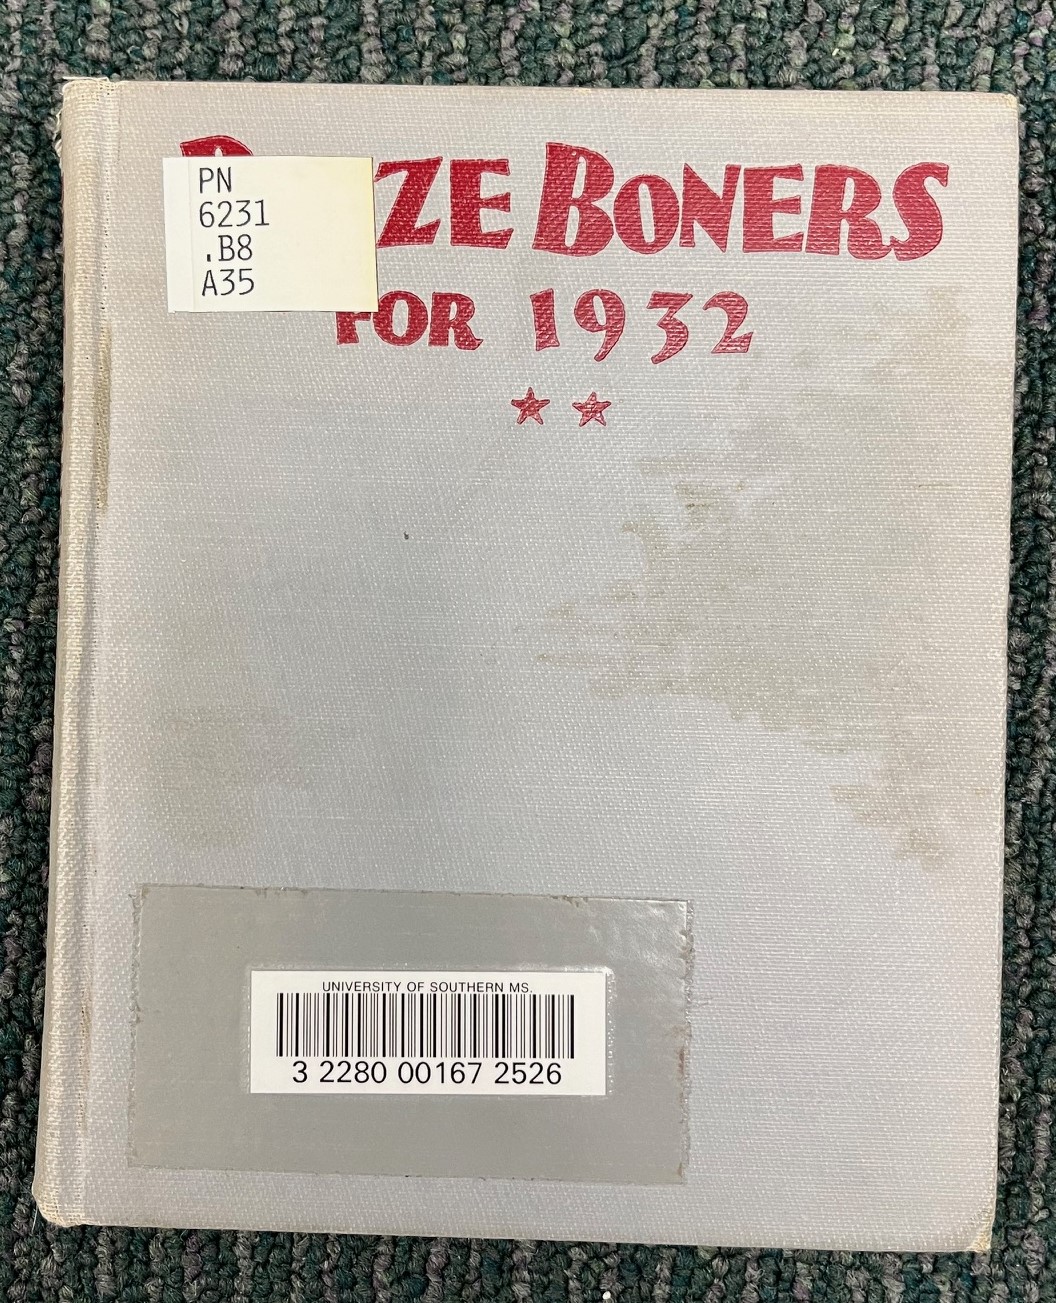 Prize Boners for 1932 cover